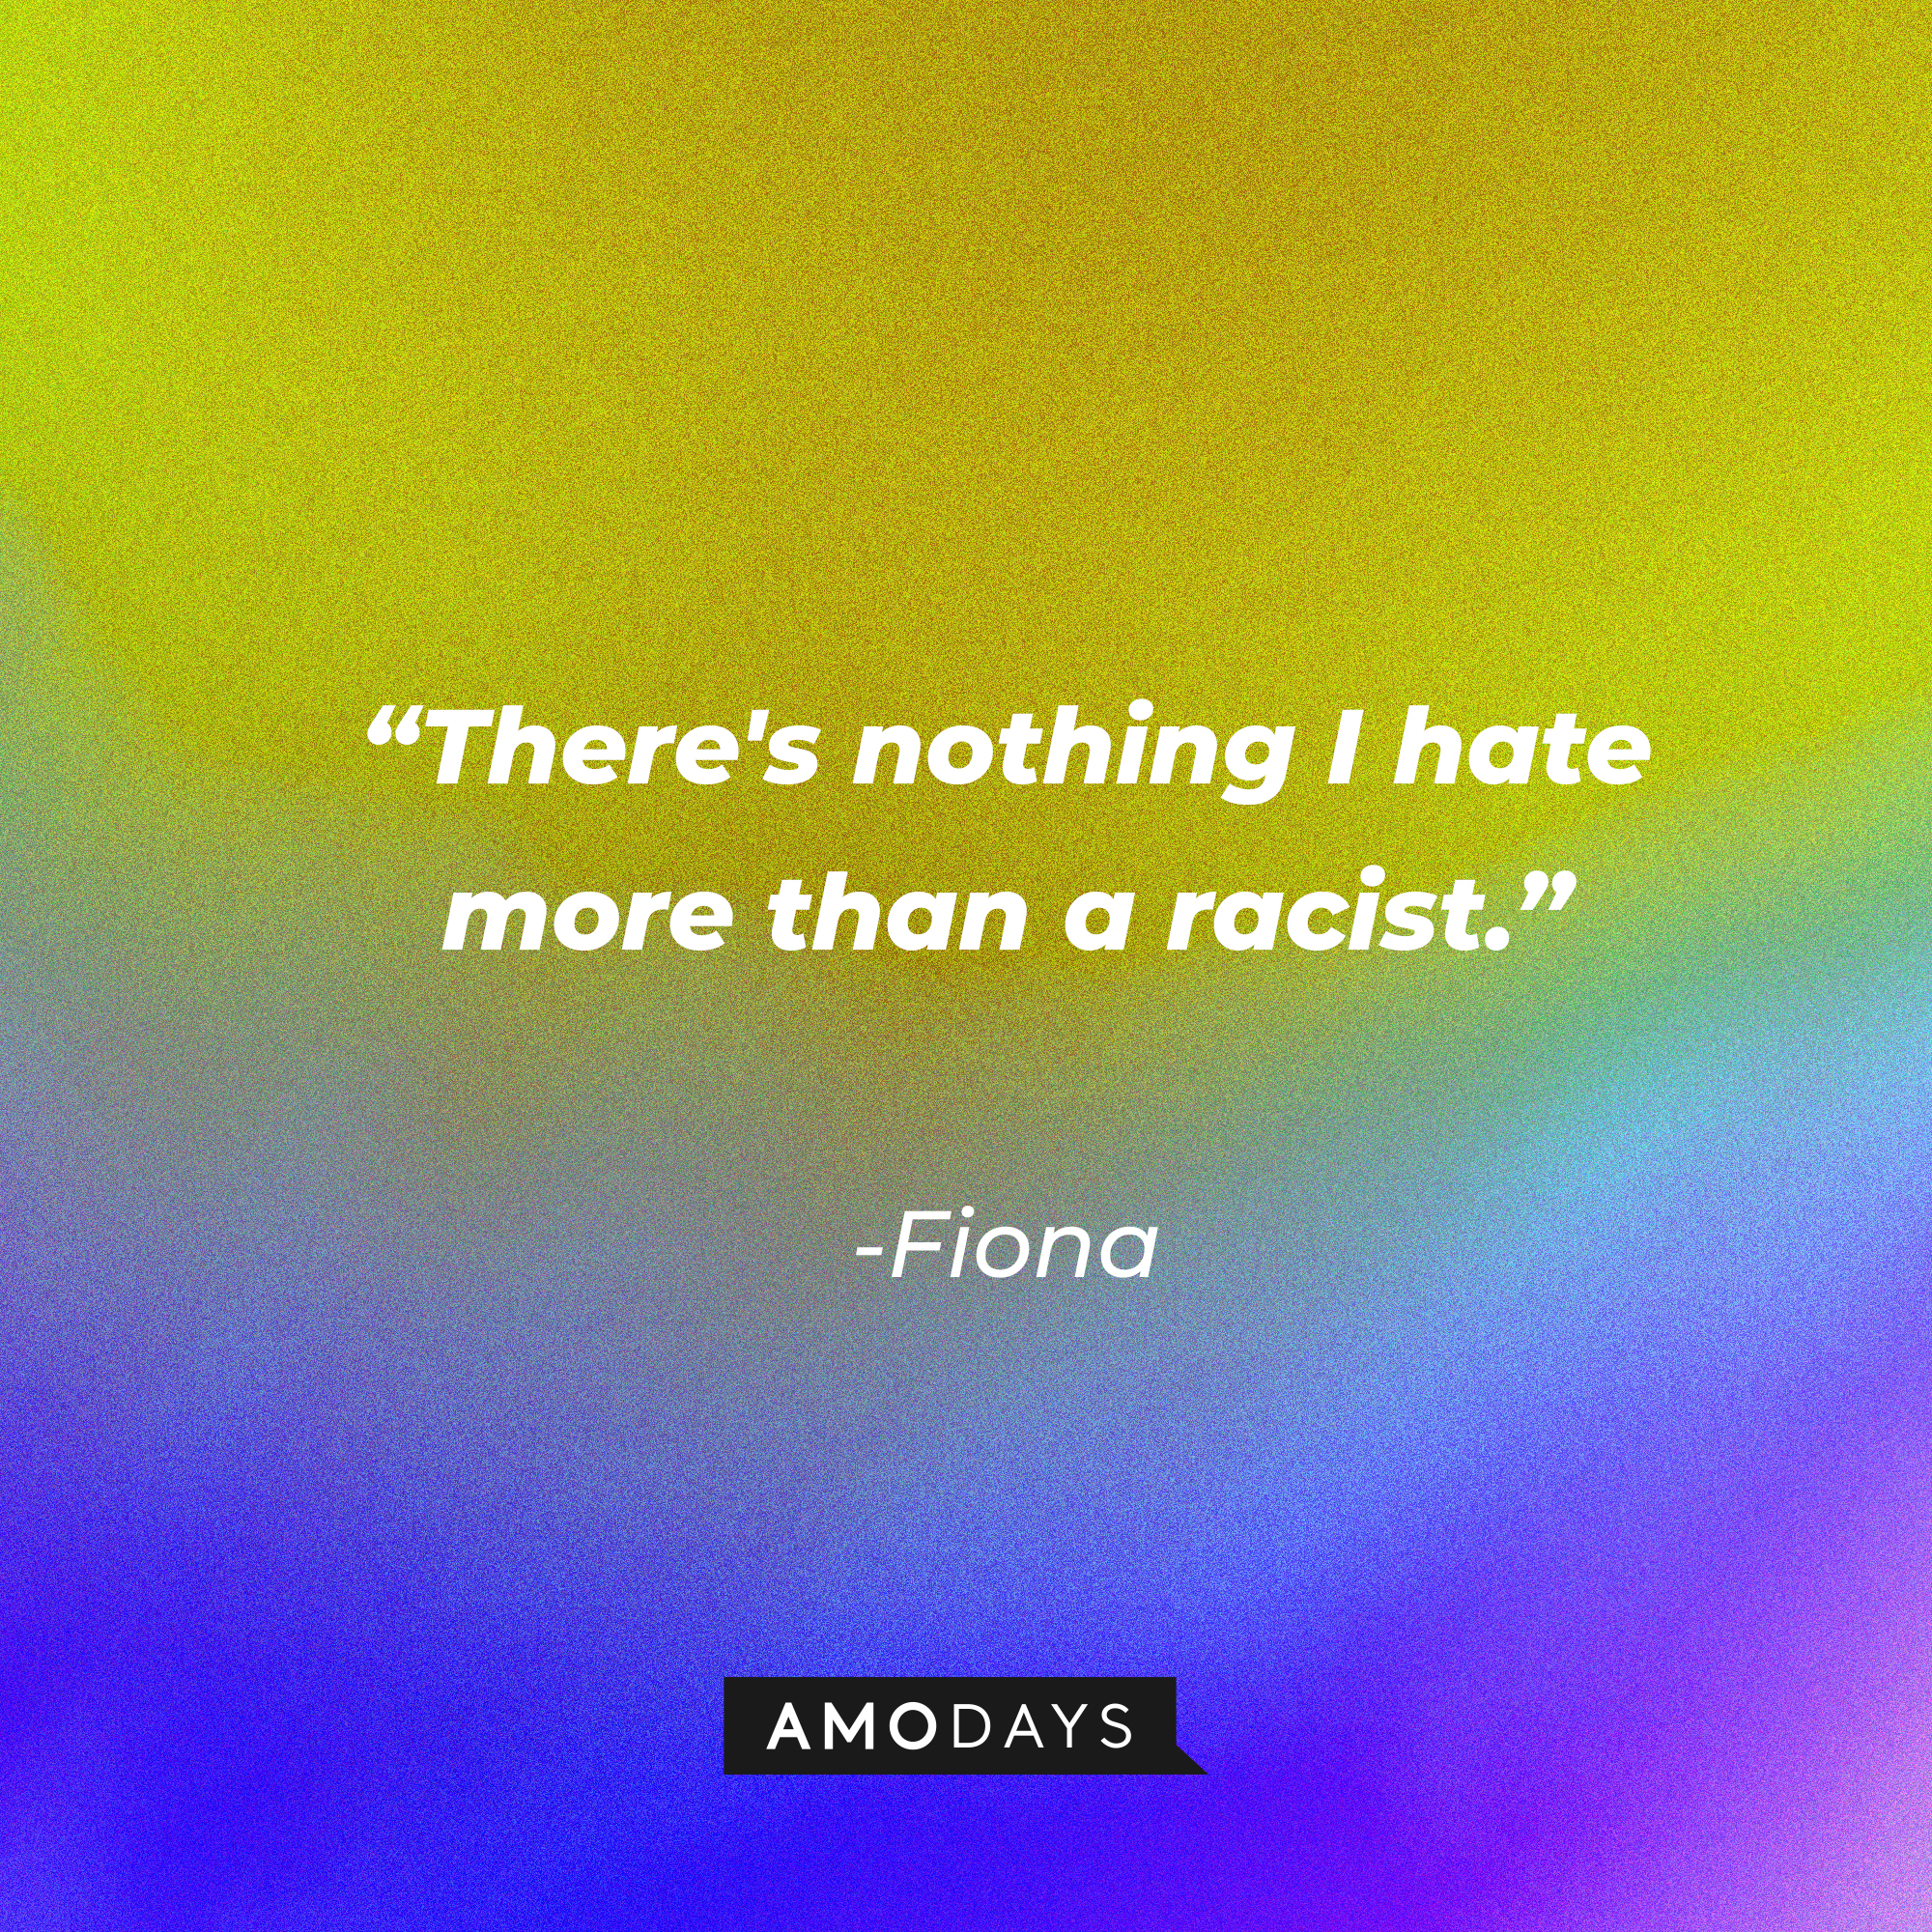 Fiona’s quote: “There's nothing I hate more than a racist.” | Source: AmoDays